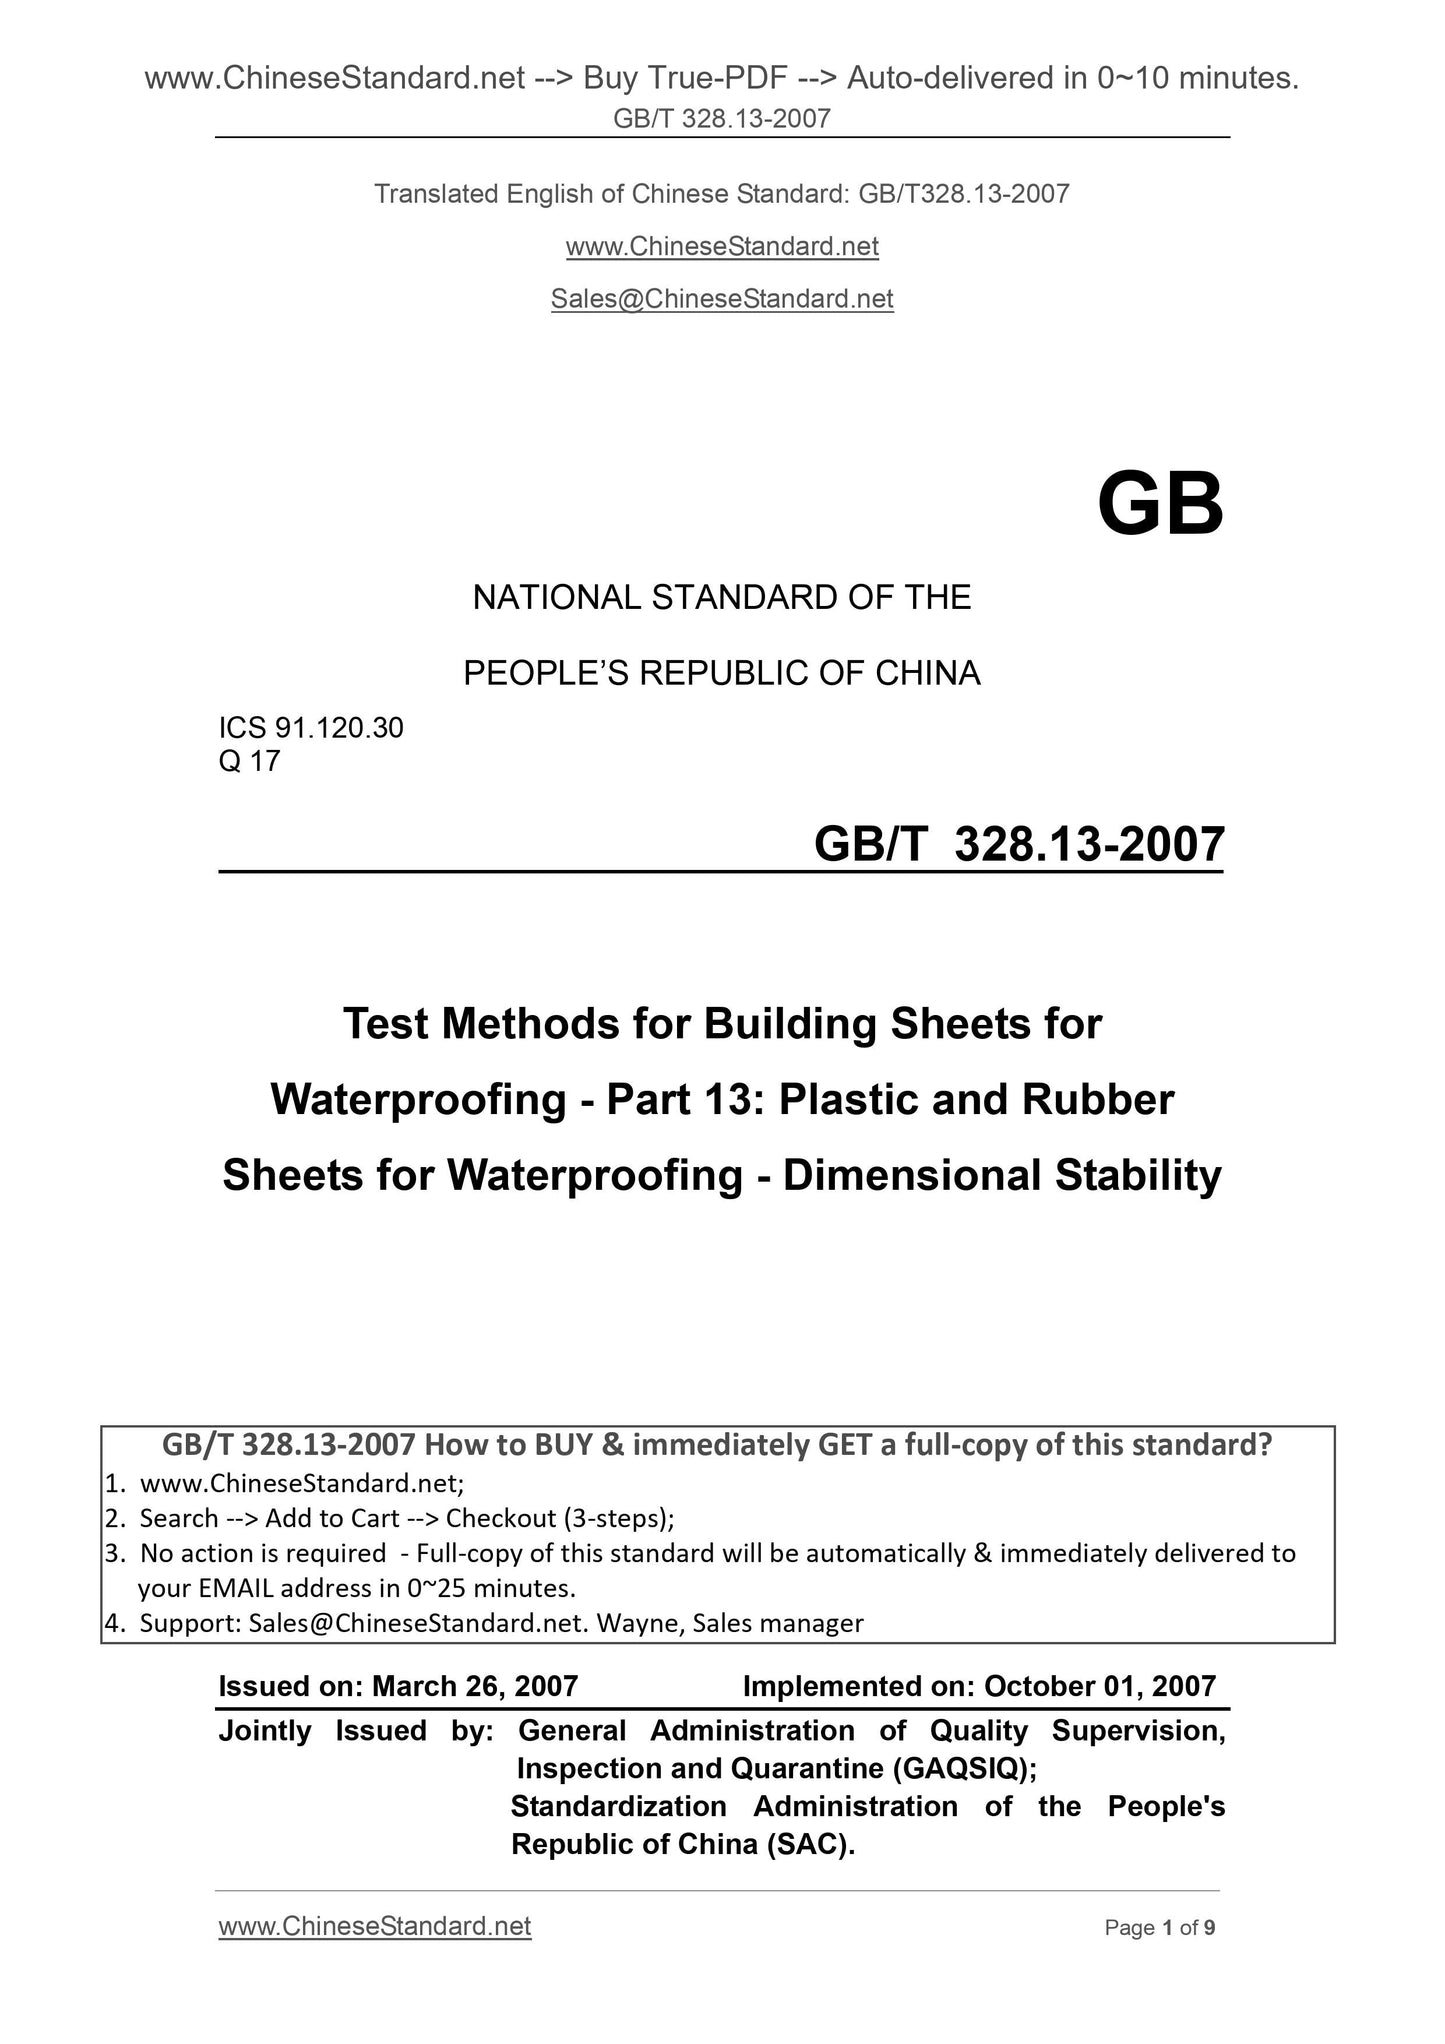 GB/T 328.13-2007 Page 1